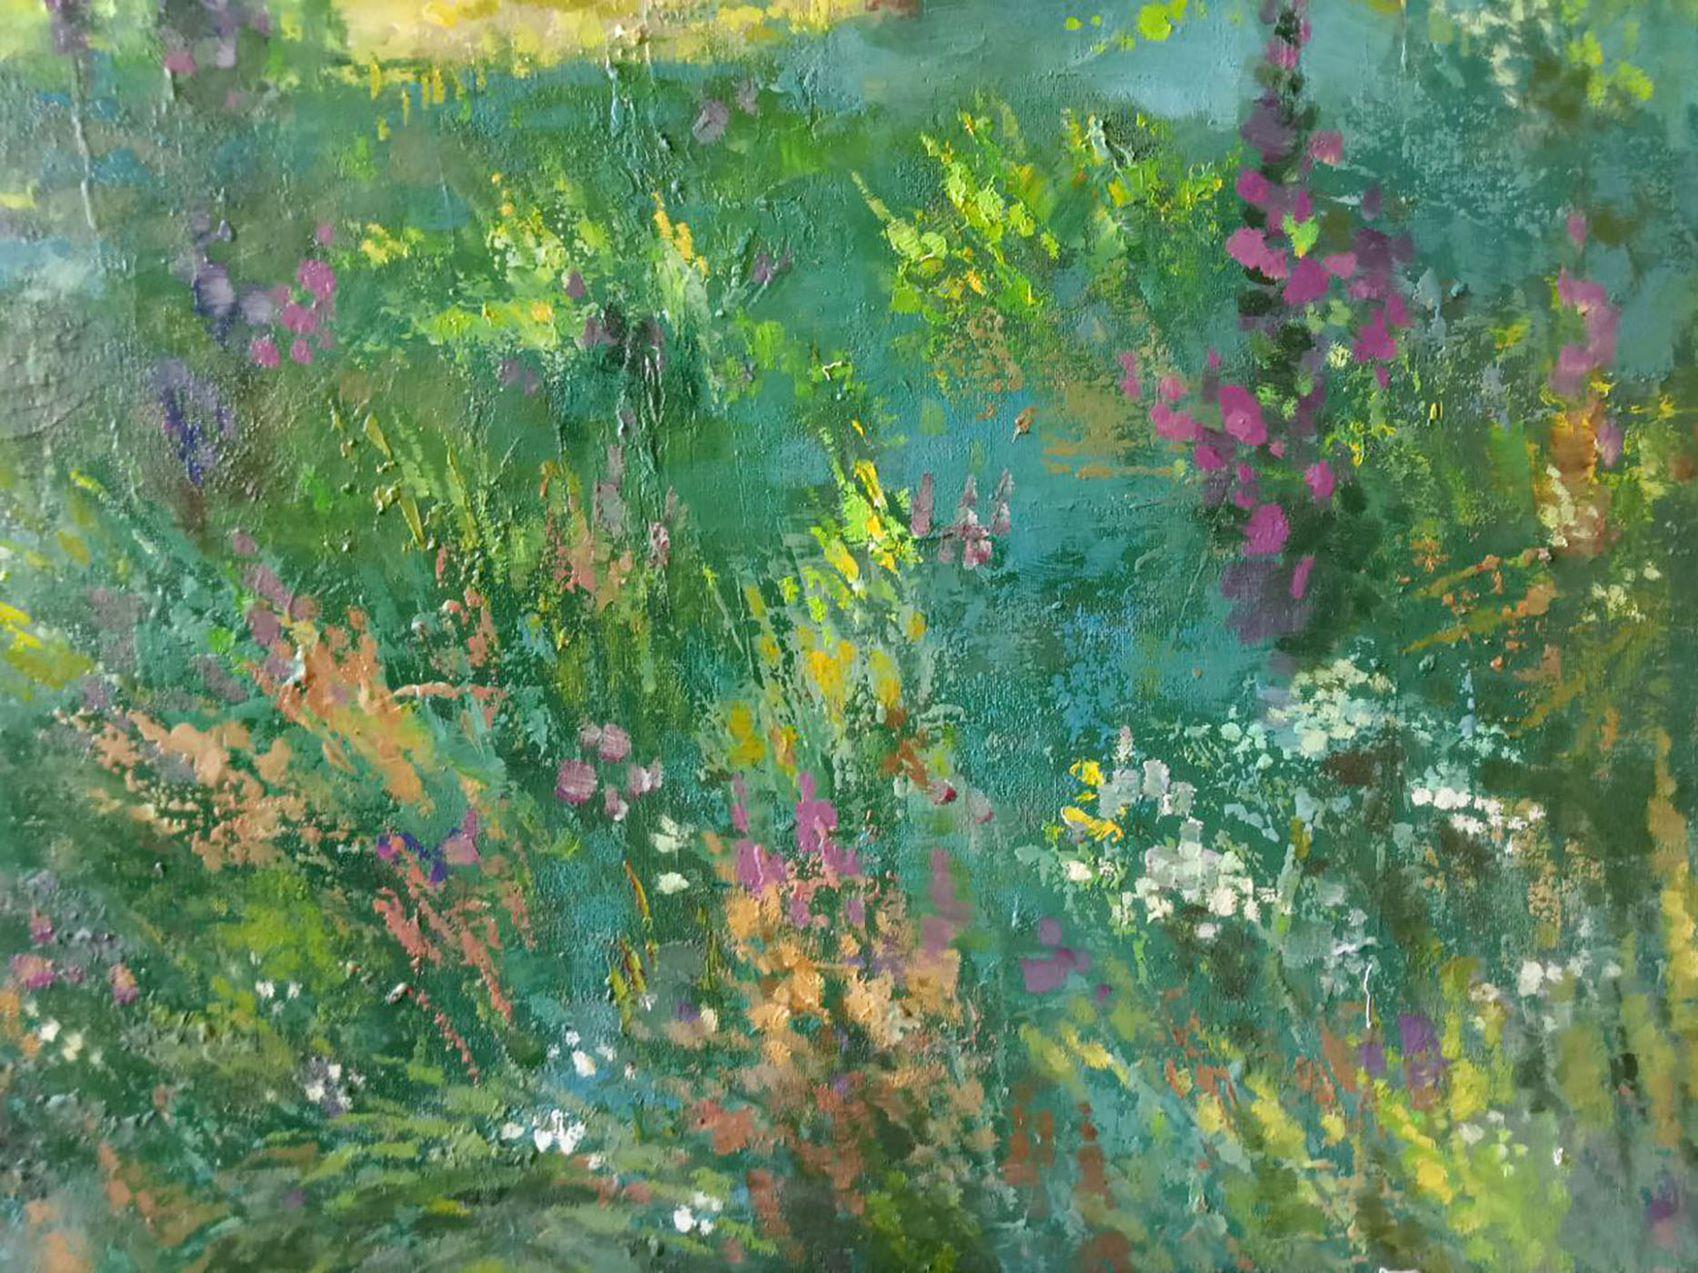 Summer Meadow, Landscape, Impressionism, Original oil Painting, Ready to Hang - Black Landscape Painting by Anatoly Tarabanov